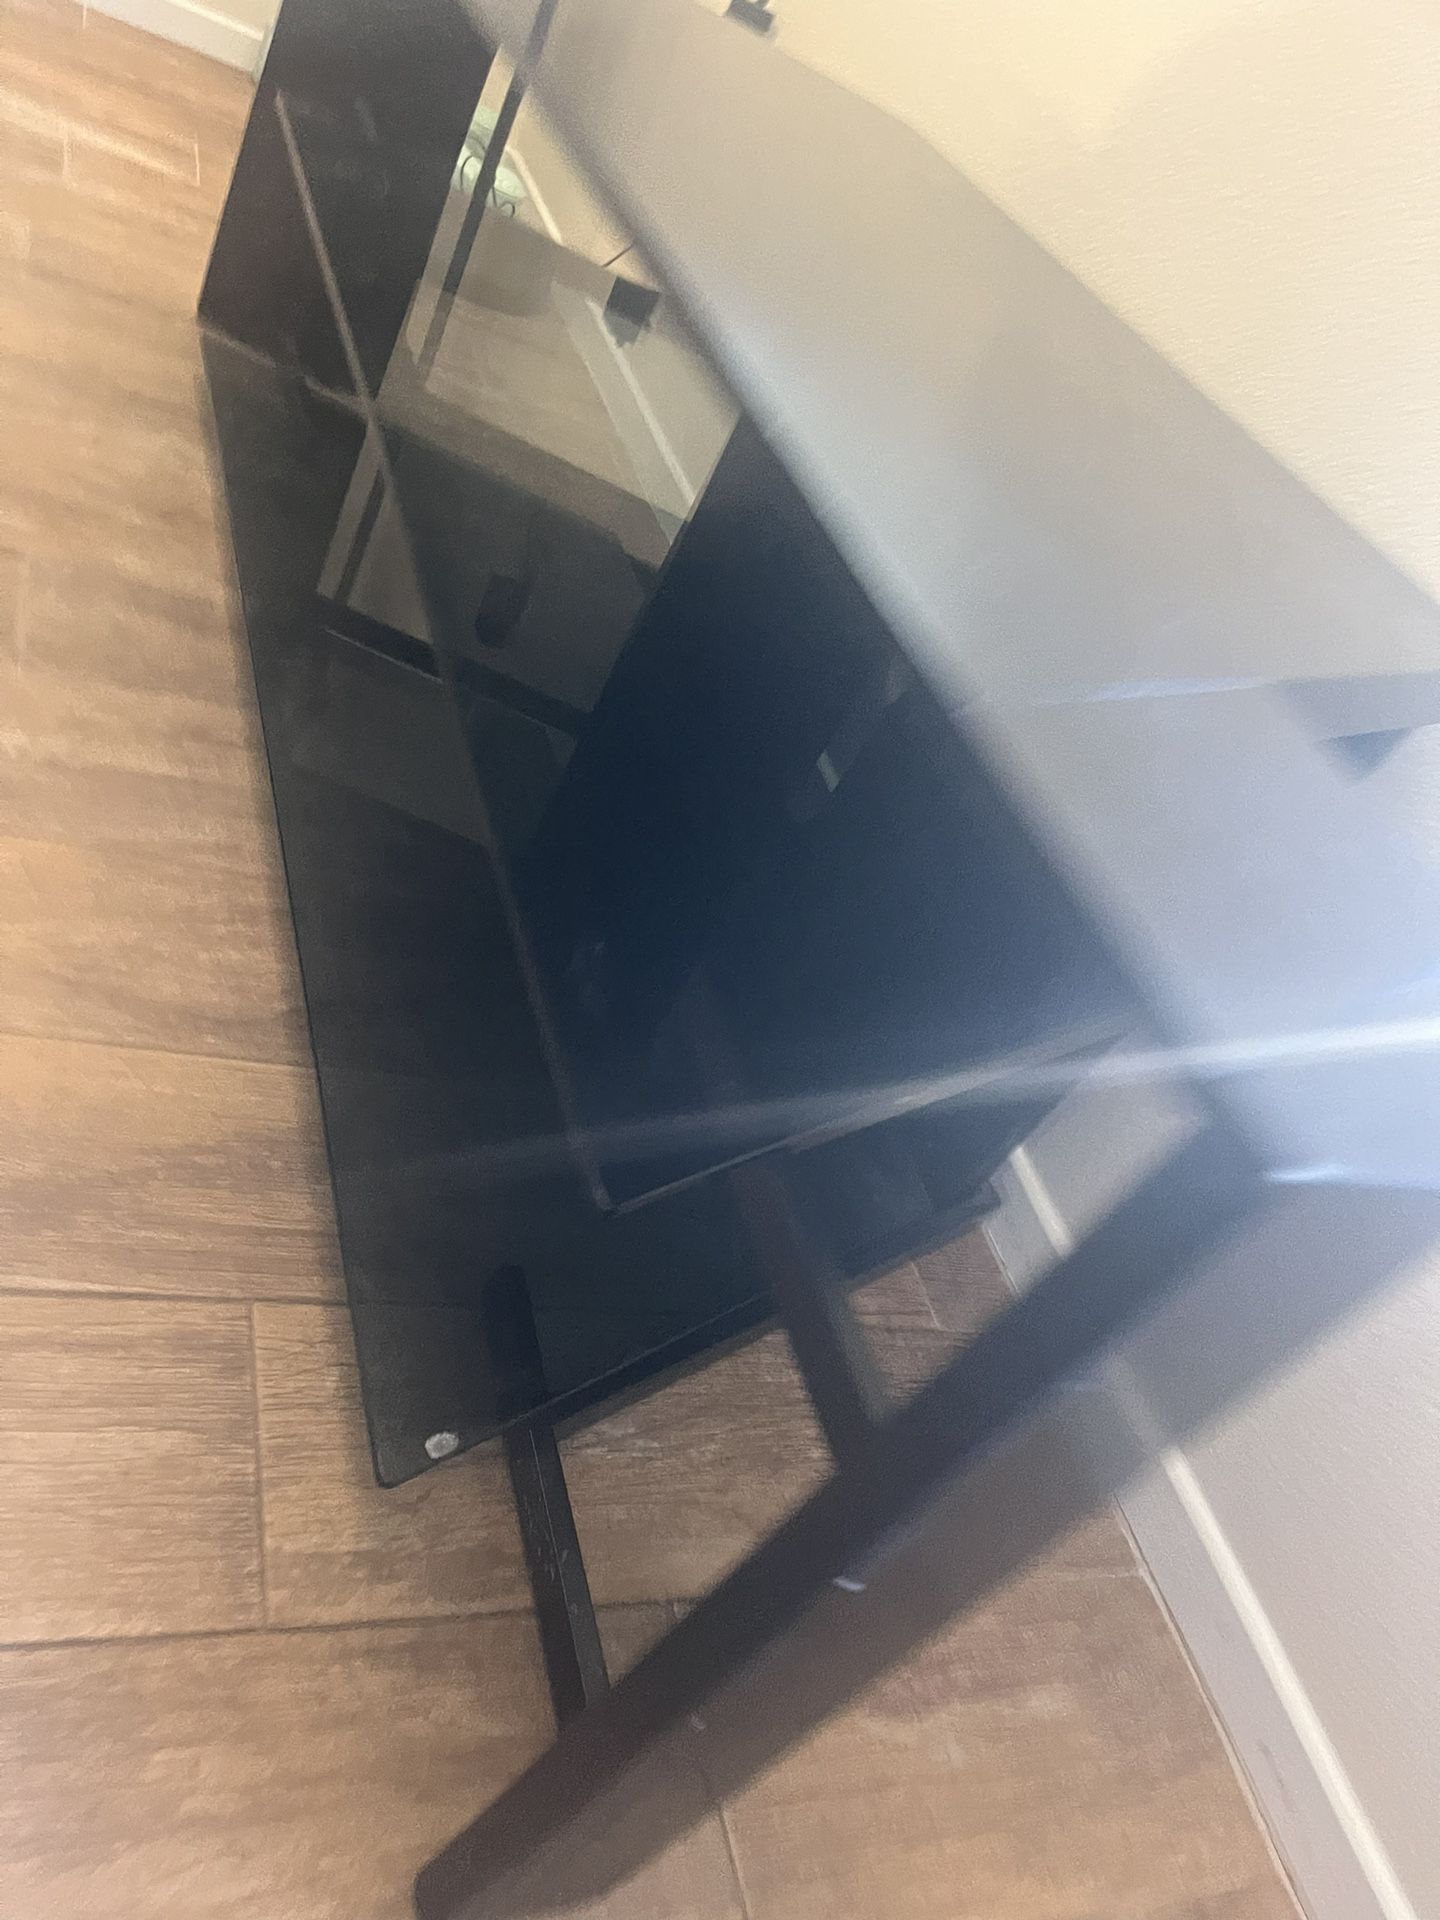 Black TV stand with glass holders